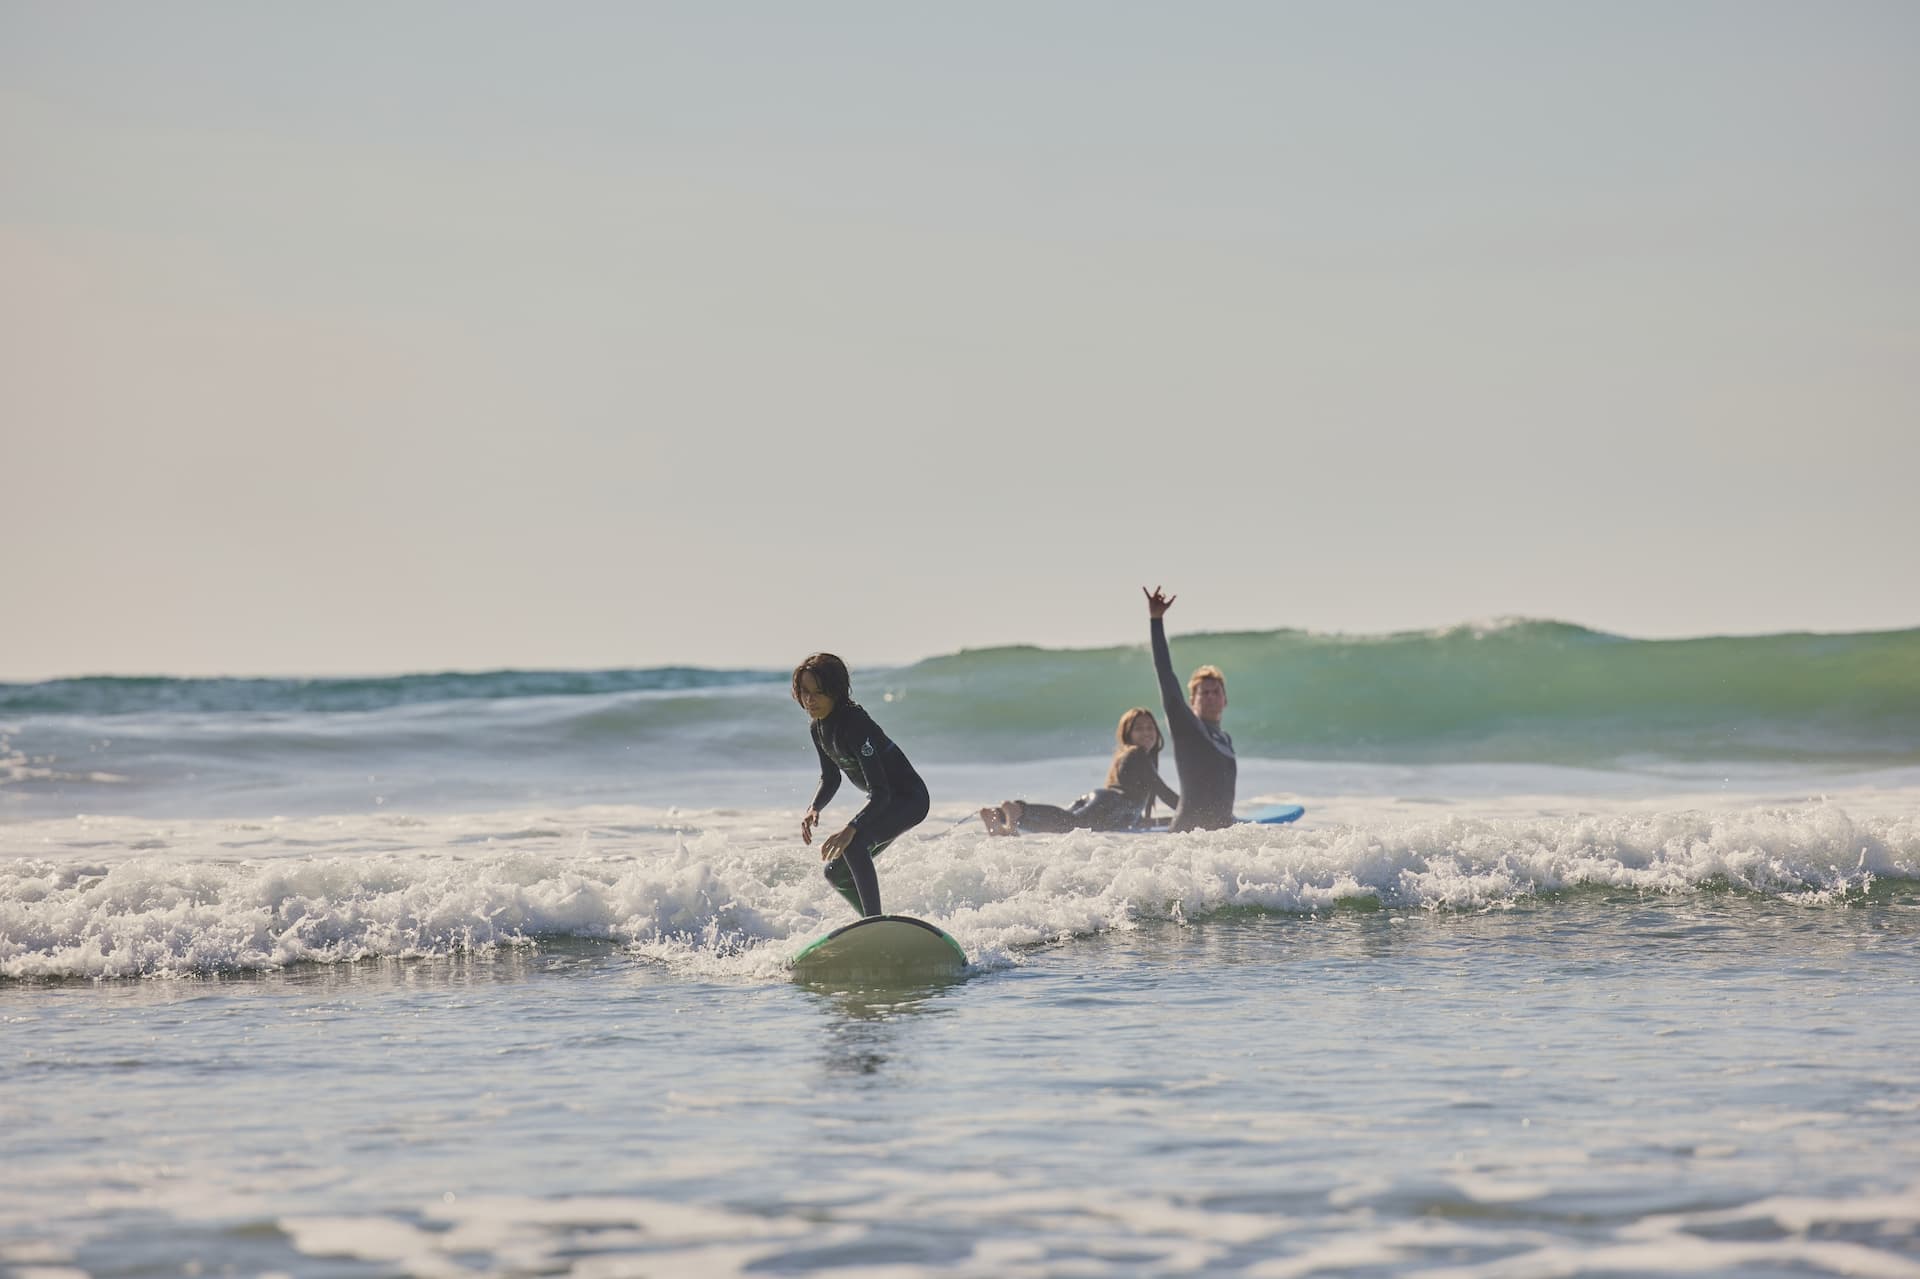 Surf lessons in oceanside: catching waves and creating memories